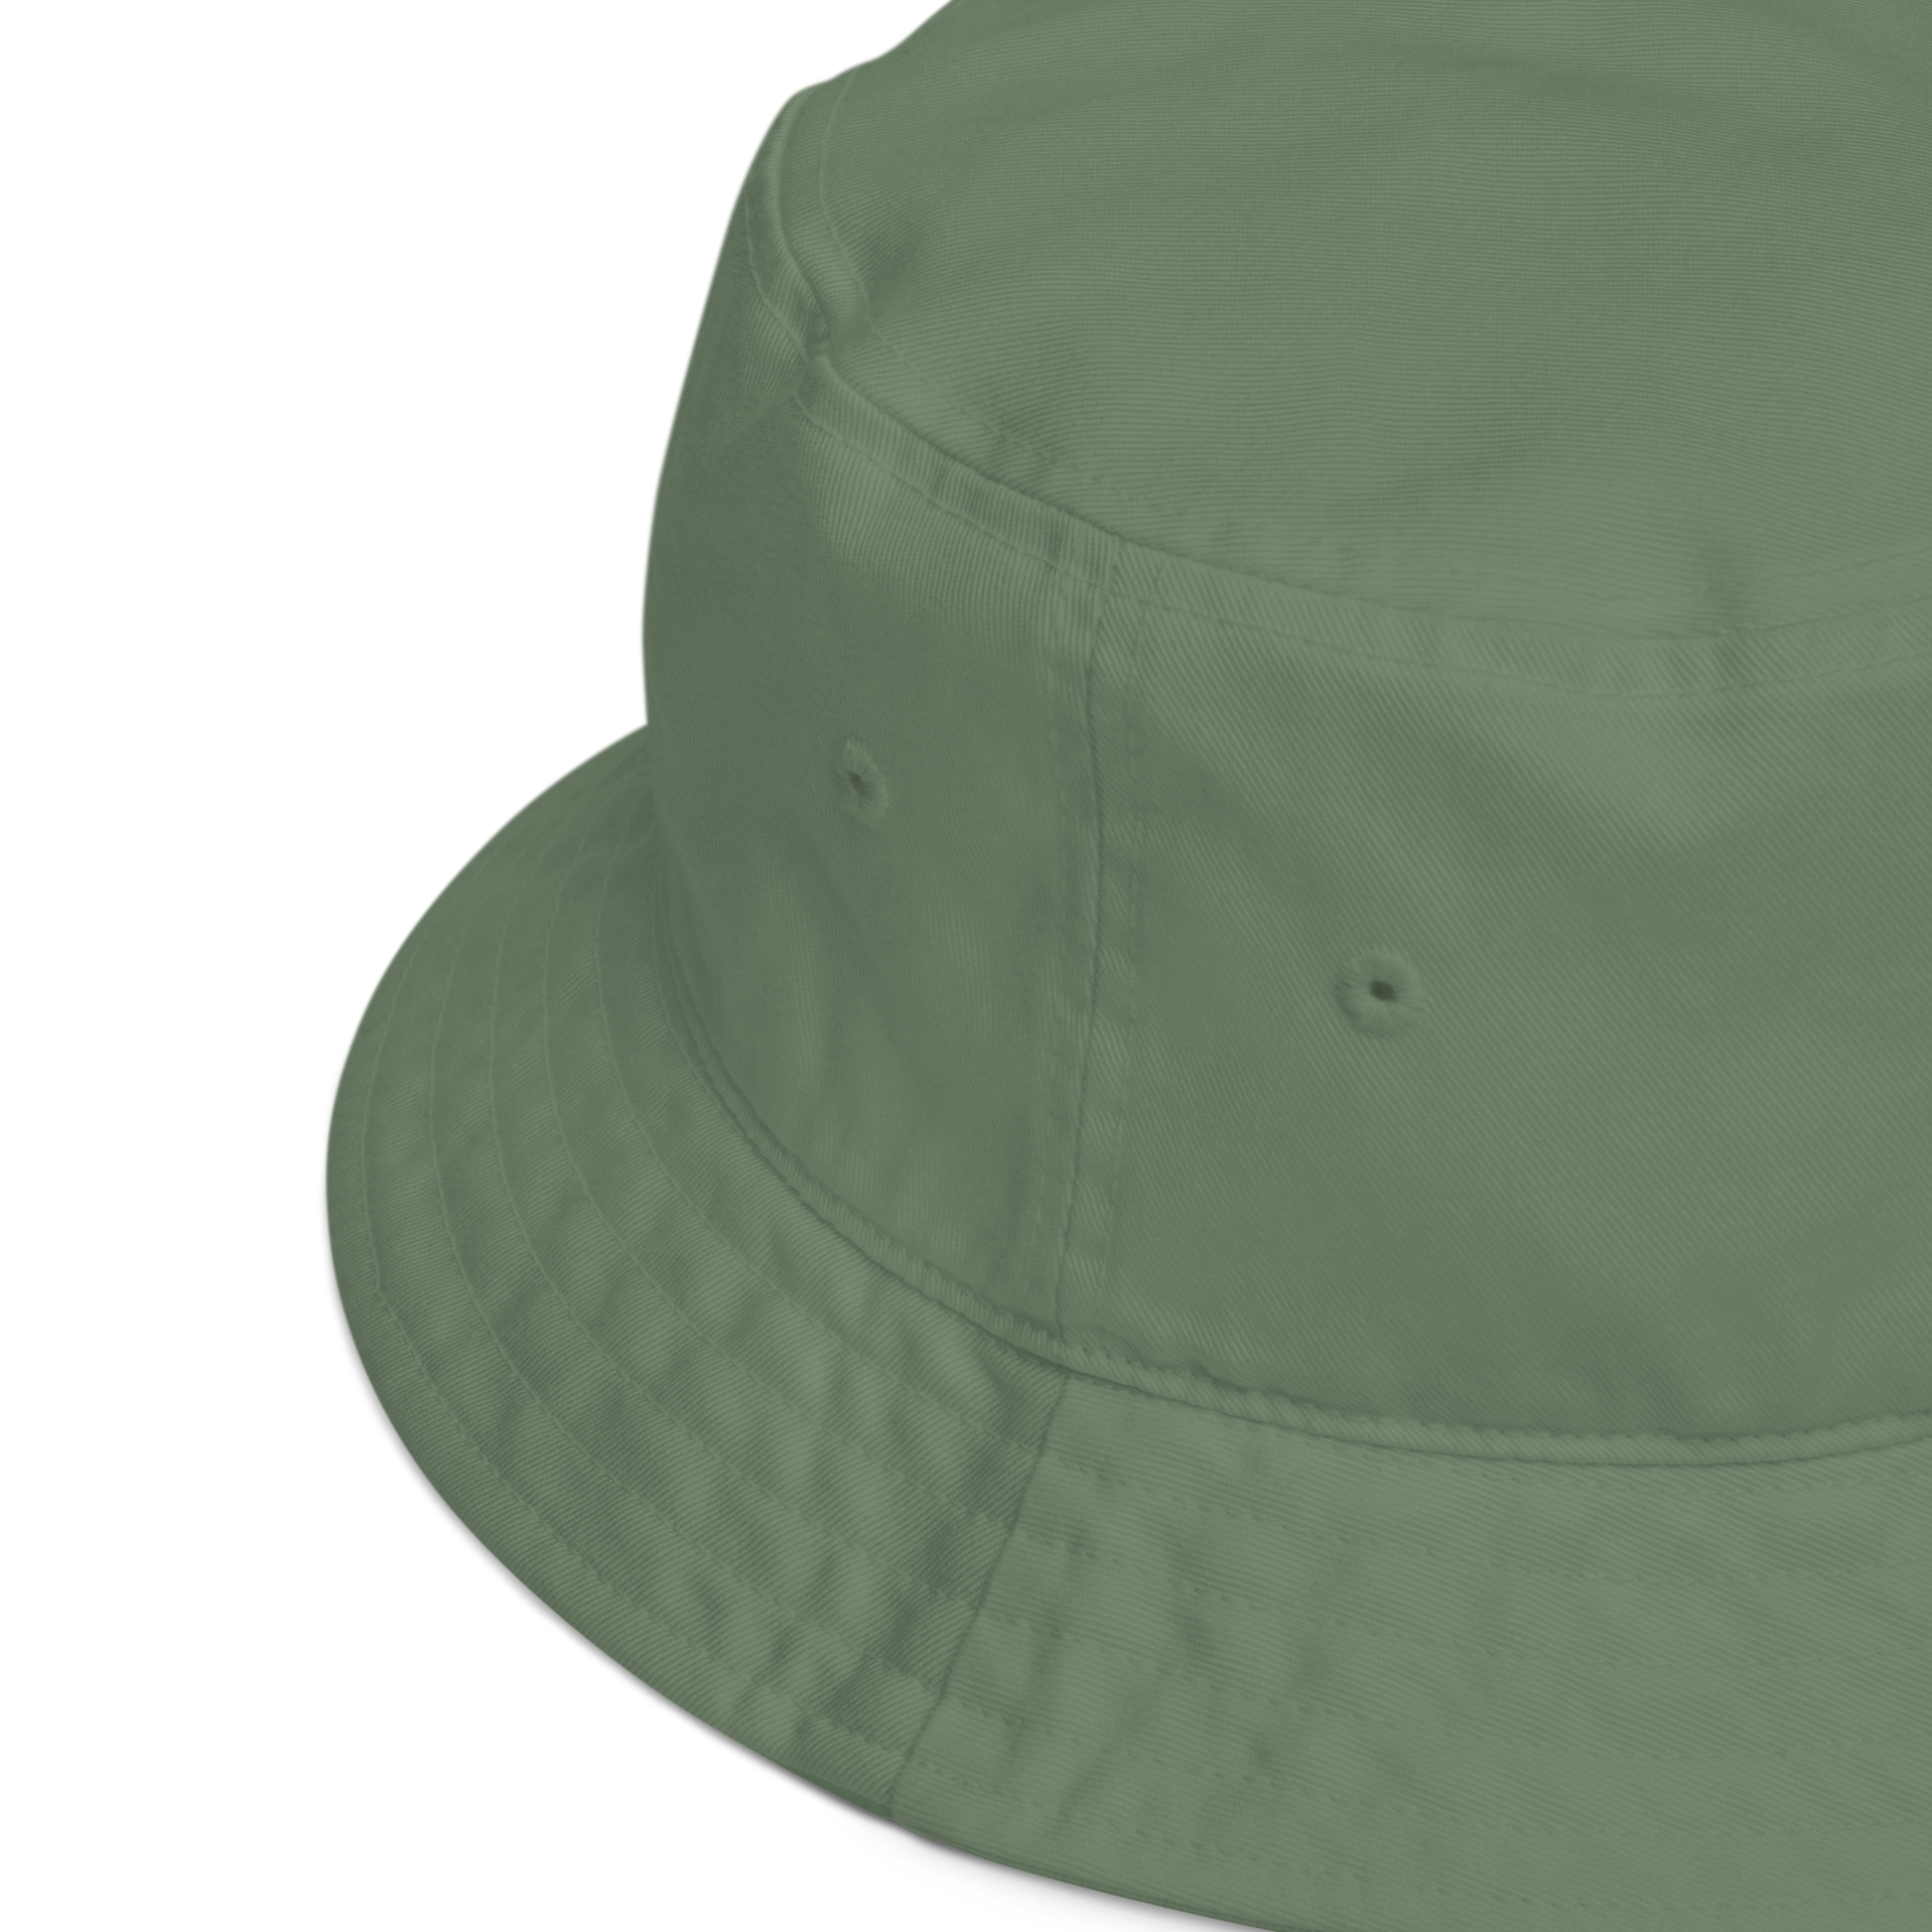 Product details of a Dill Green Organic Bucket Hat featuring a recognizable Boozy Fox embroidery logo on the front - Bucket Hats - Boozy Fox